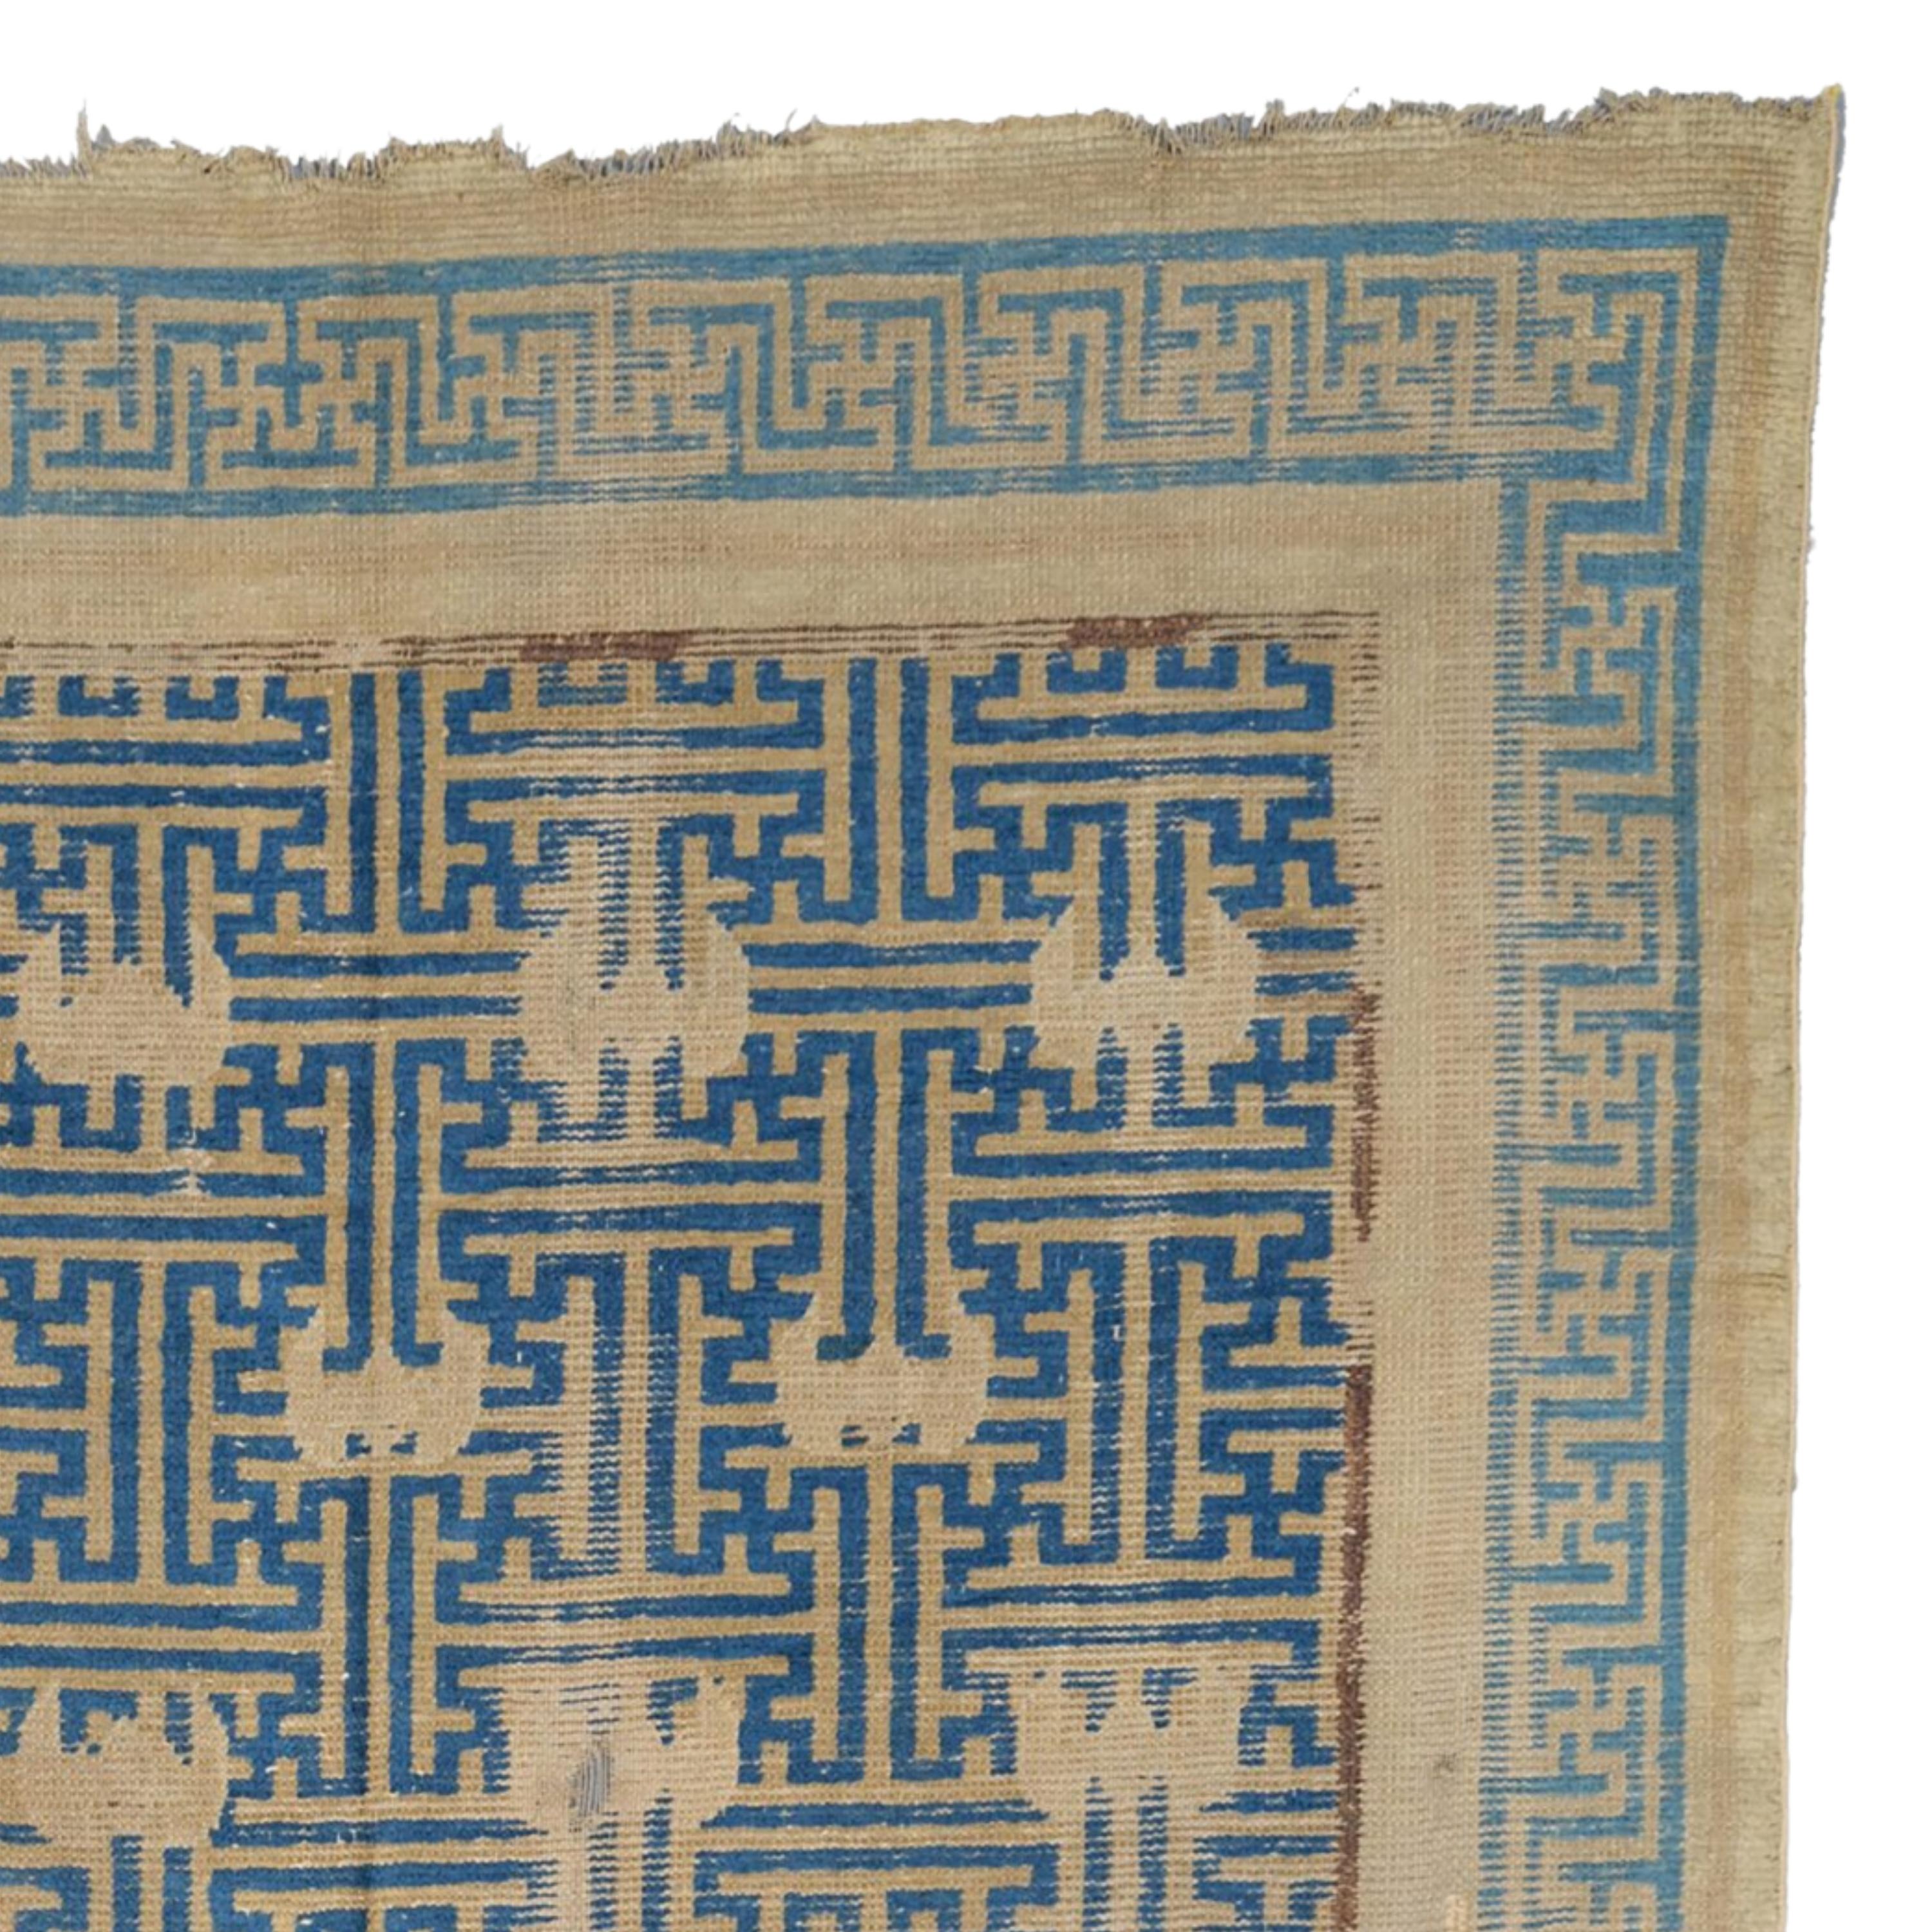 17th Century Ningxia Rug Fragment - Antique Chinese Rug Fragment In Good Condition For Sale In Sultanahmet, 34